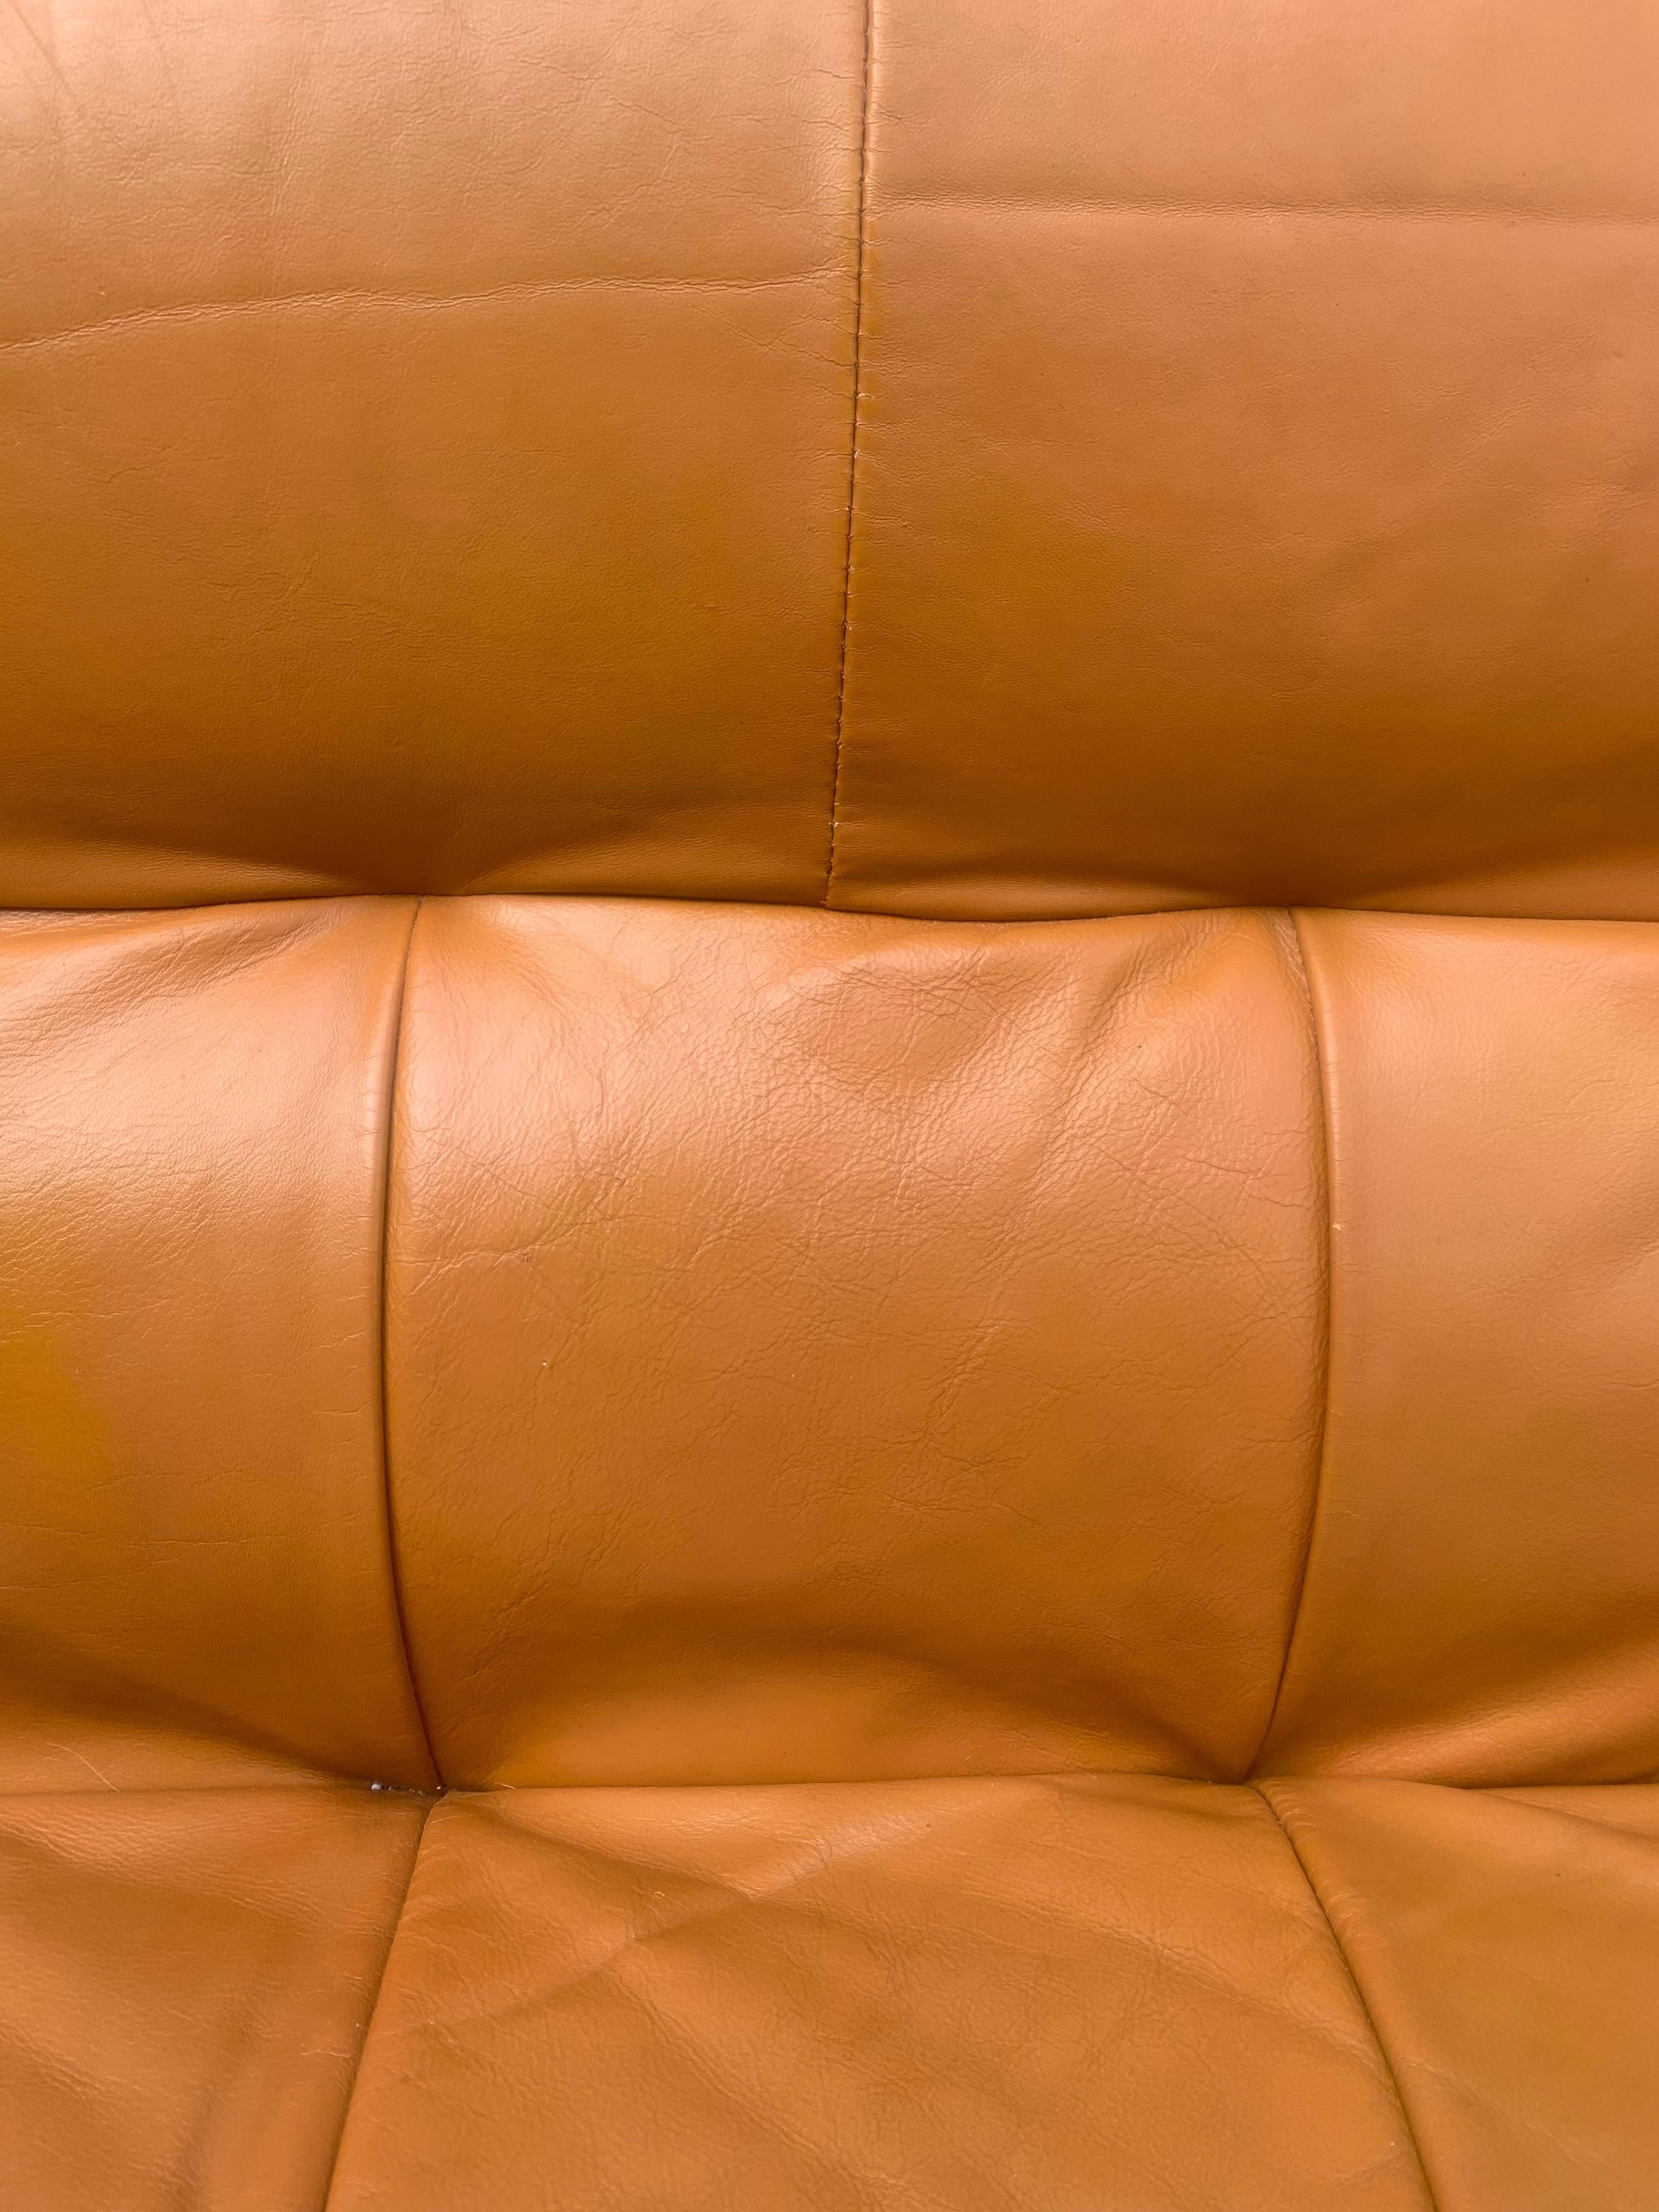 Midcentury Brazilian Modern Percival Lafer MP-97 Sofa in Cognac Leather In Good Condition In BROOKLYN, NY